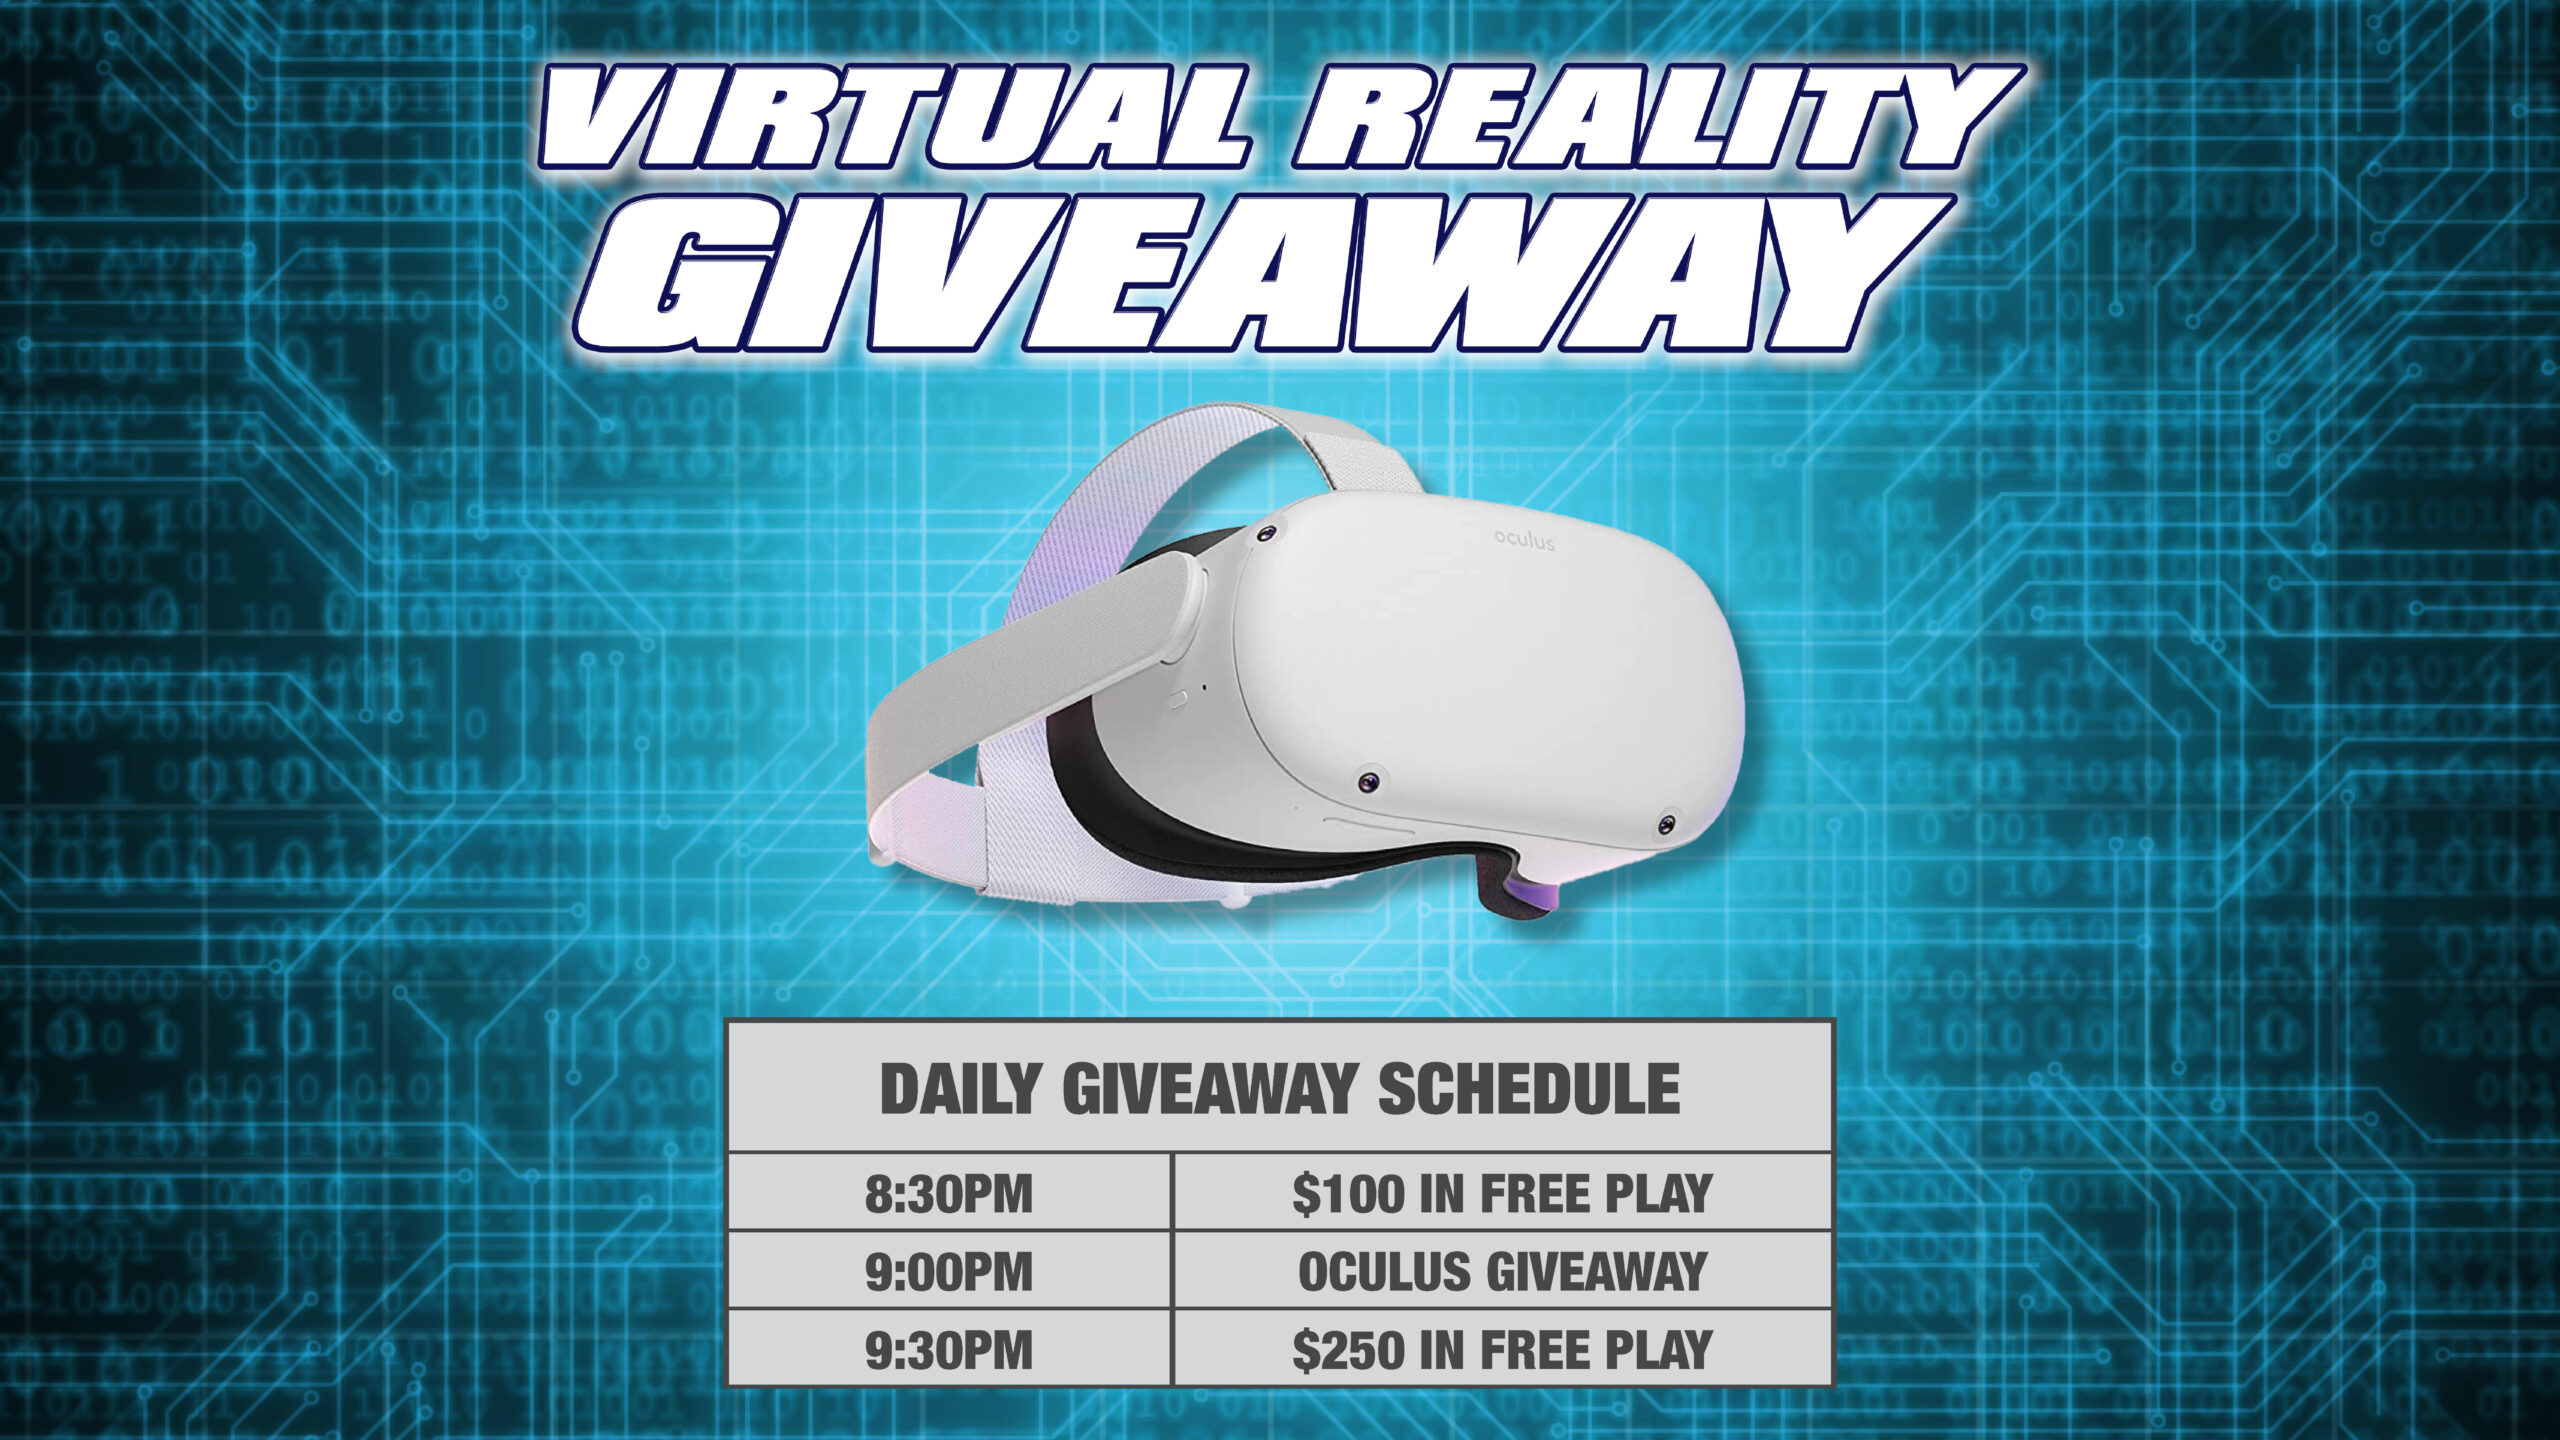 Virtual Reality Giveaway | Golden Casino